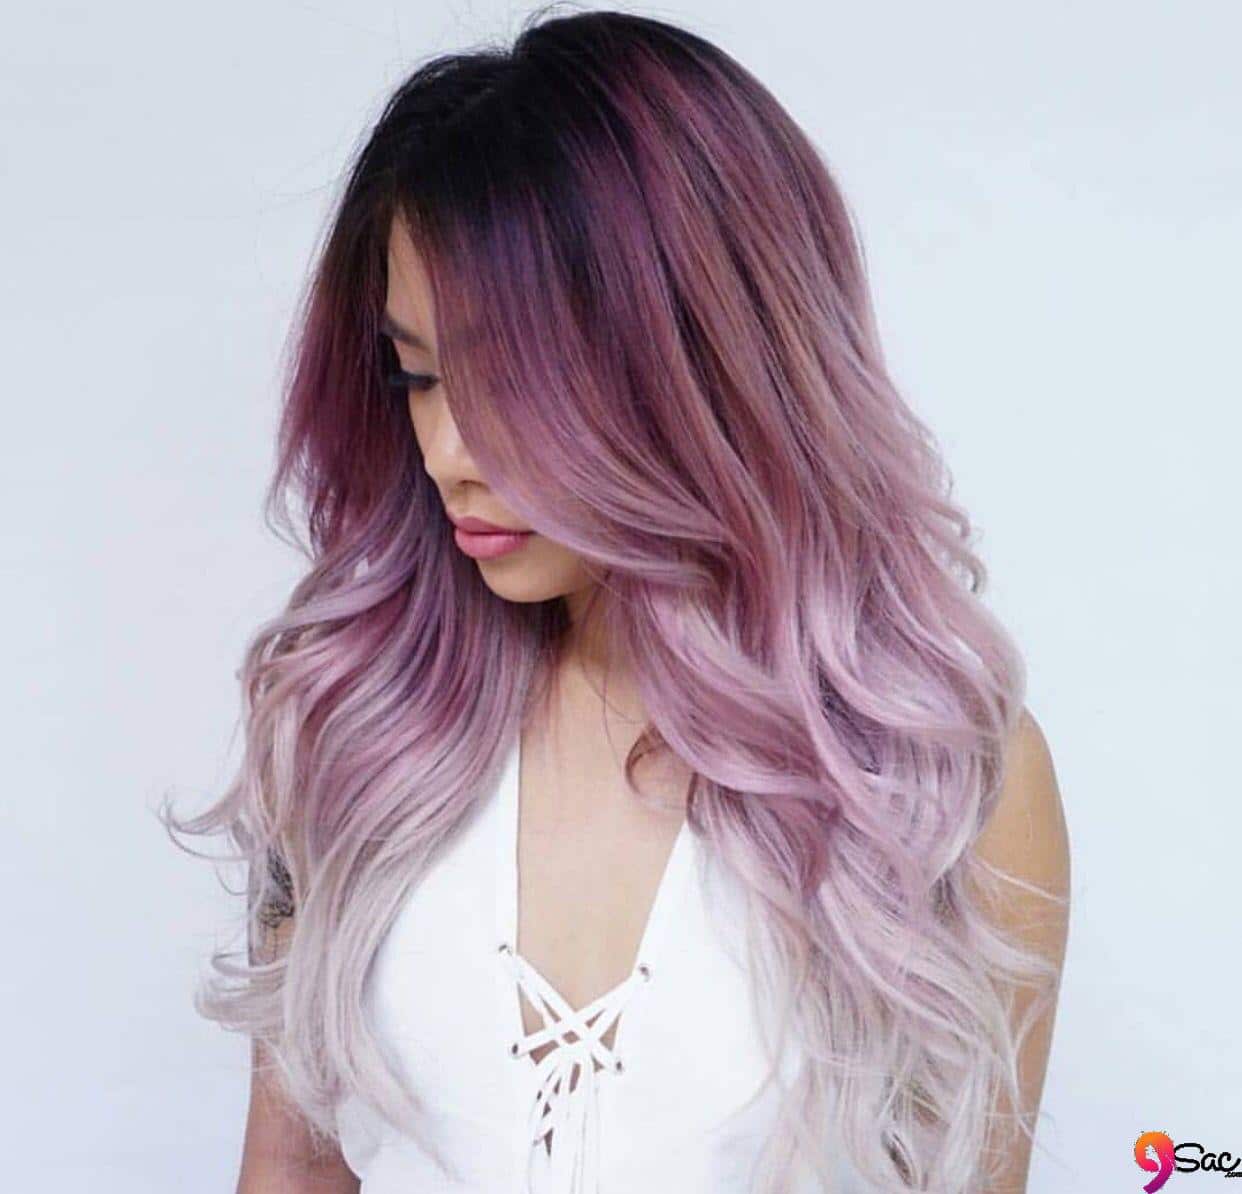 Colorful Ombre Hair Colors